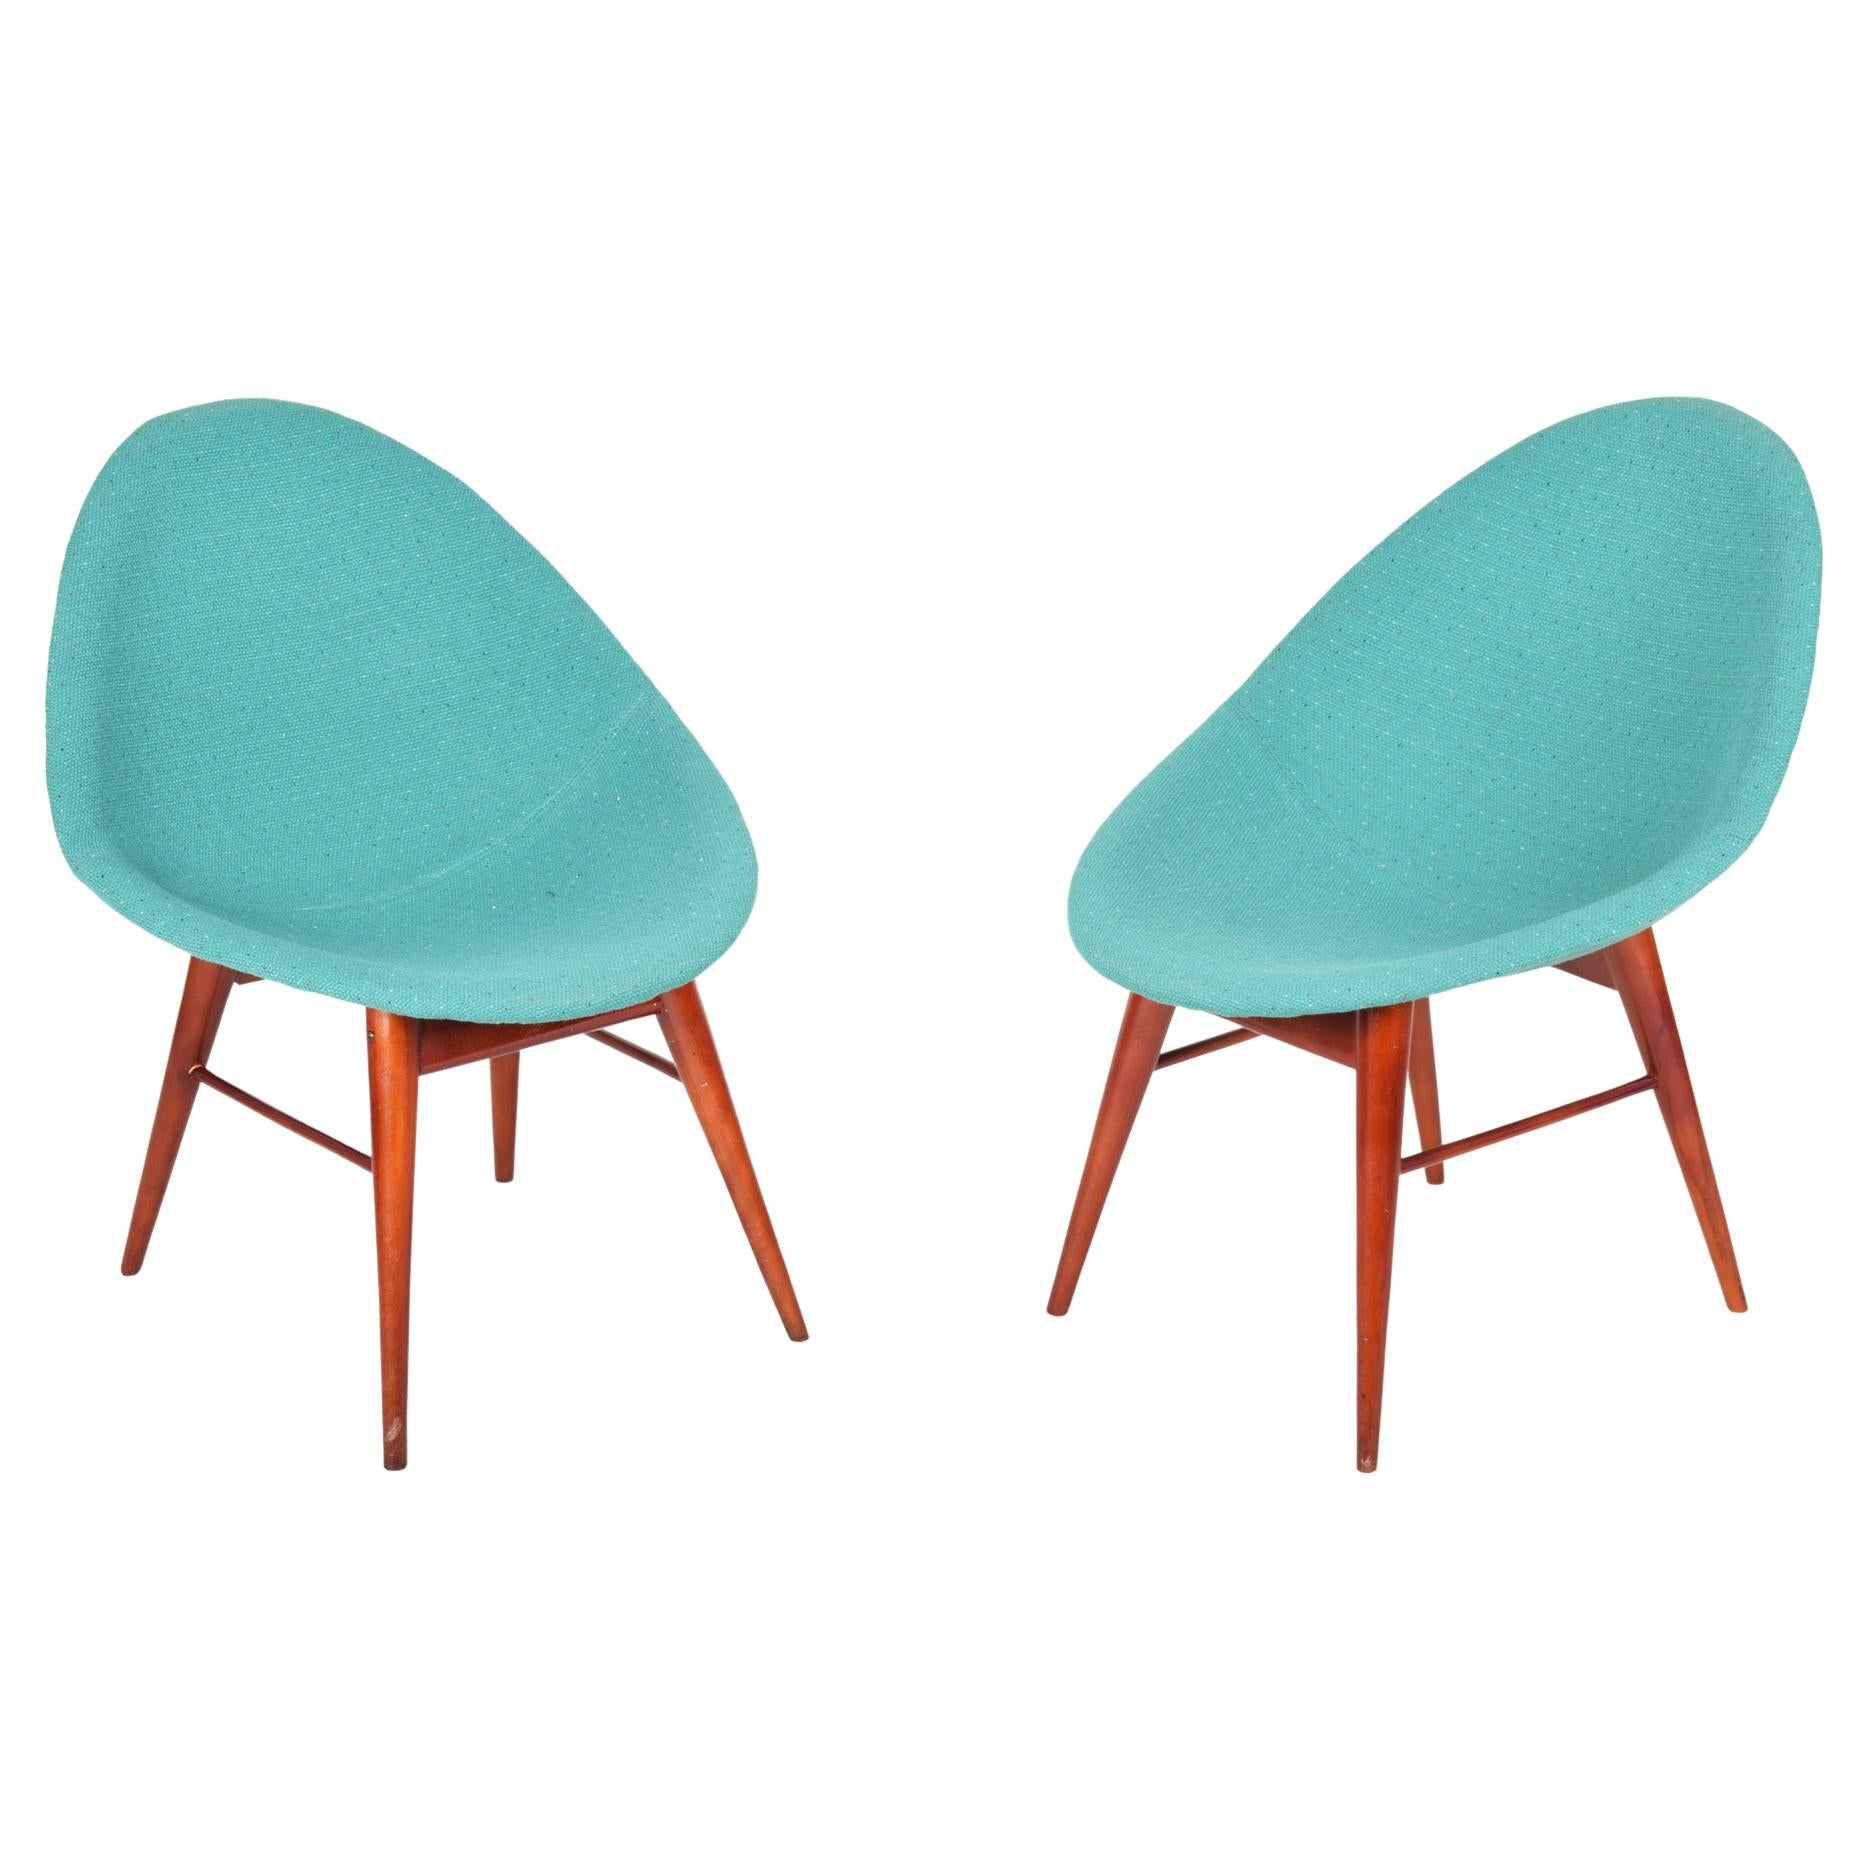 Pair of Blue Mid-Century Chairs, Made in 1960s Czechia, Fully Restored, Navrátil For Sale